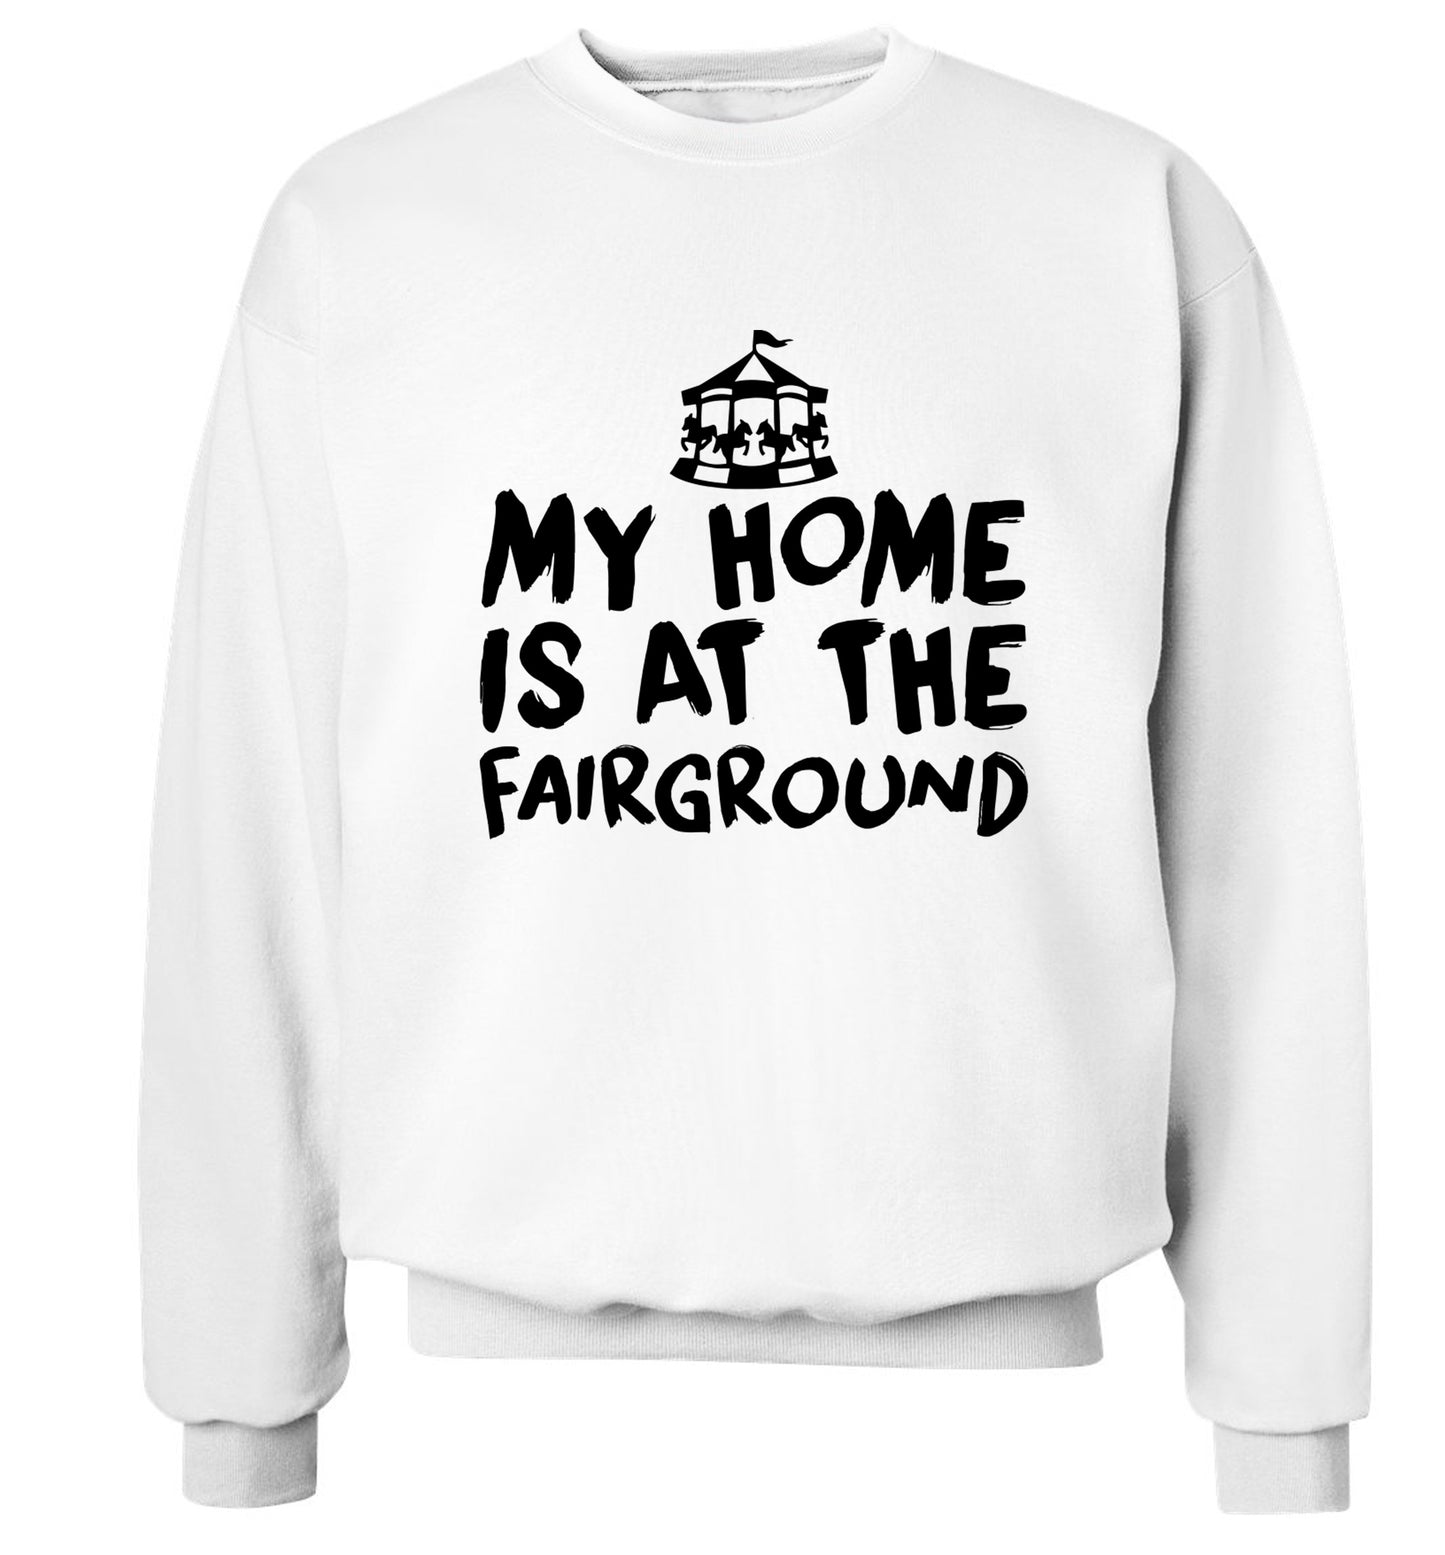 My home is at the fairground Adult's unisex white Sweater 2XL